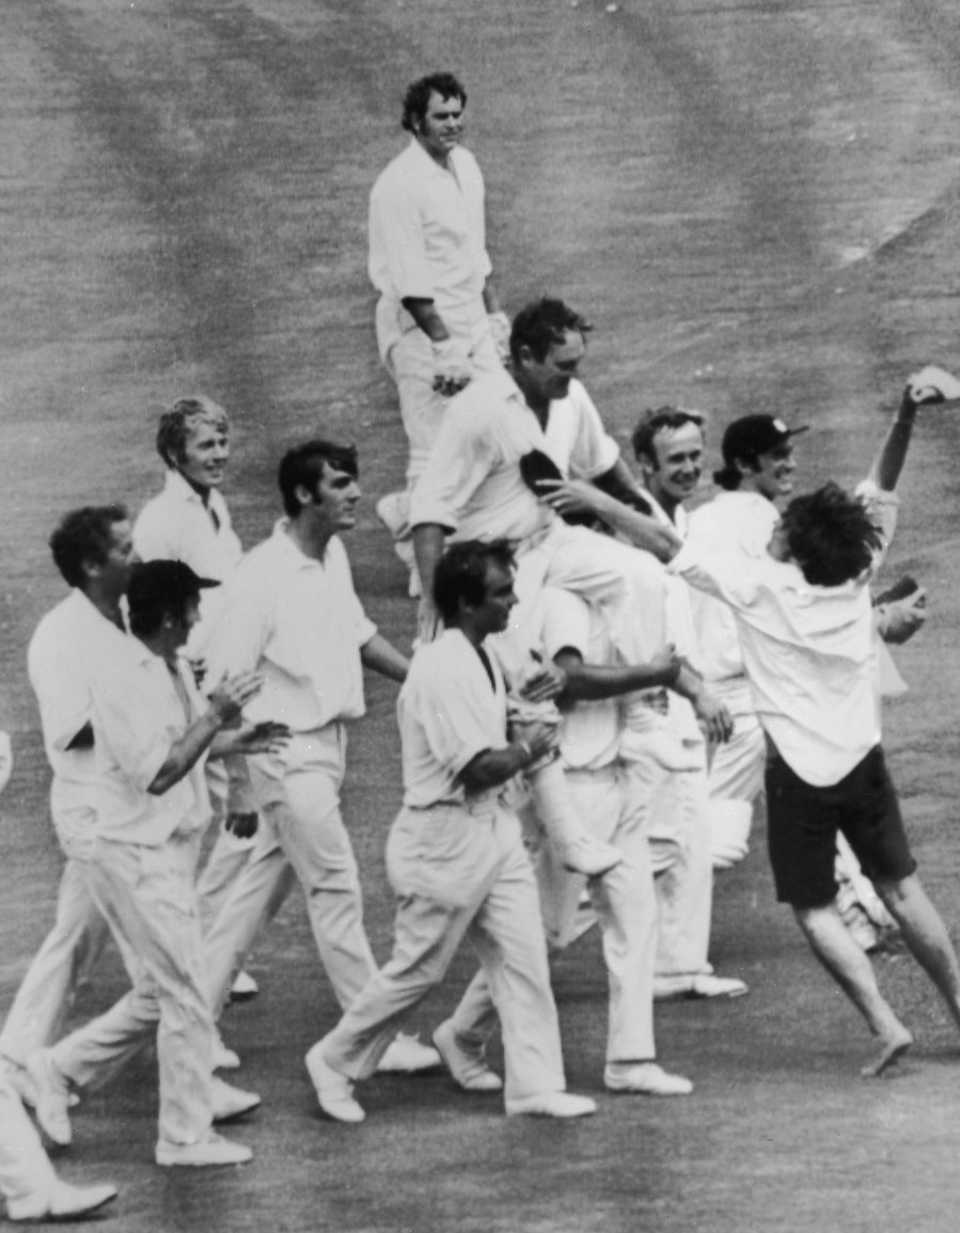 England captain Ray Illingworth is lifted onto the shoulders of his team-mates after the Ashes win, Australia v England, 7th Test, Sydney, February 17, 1971